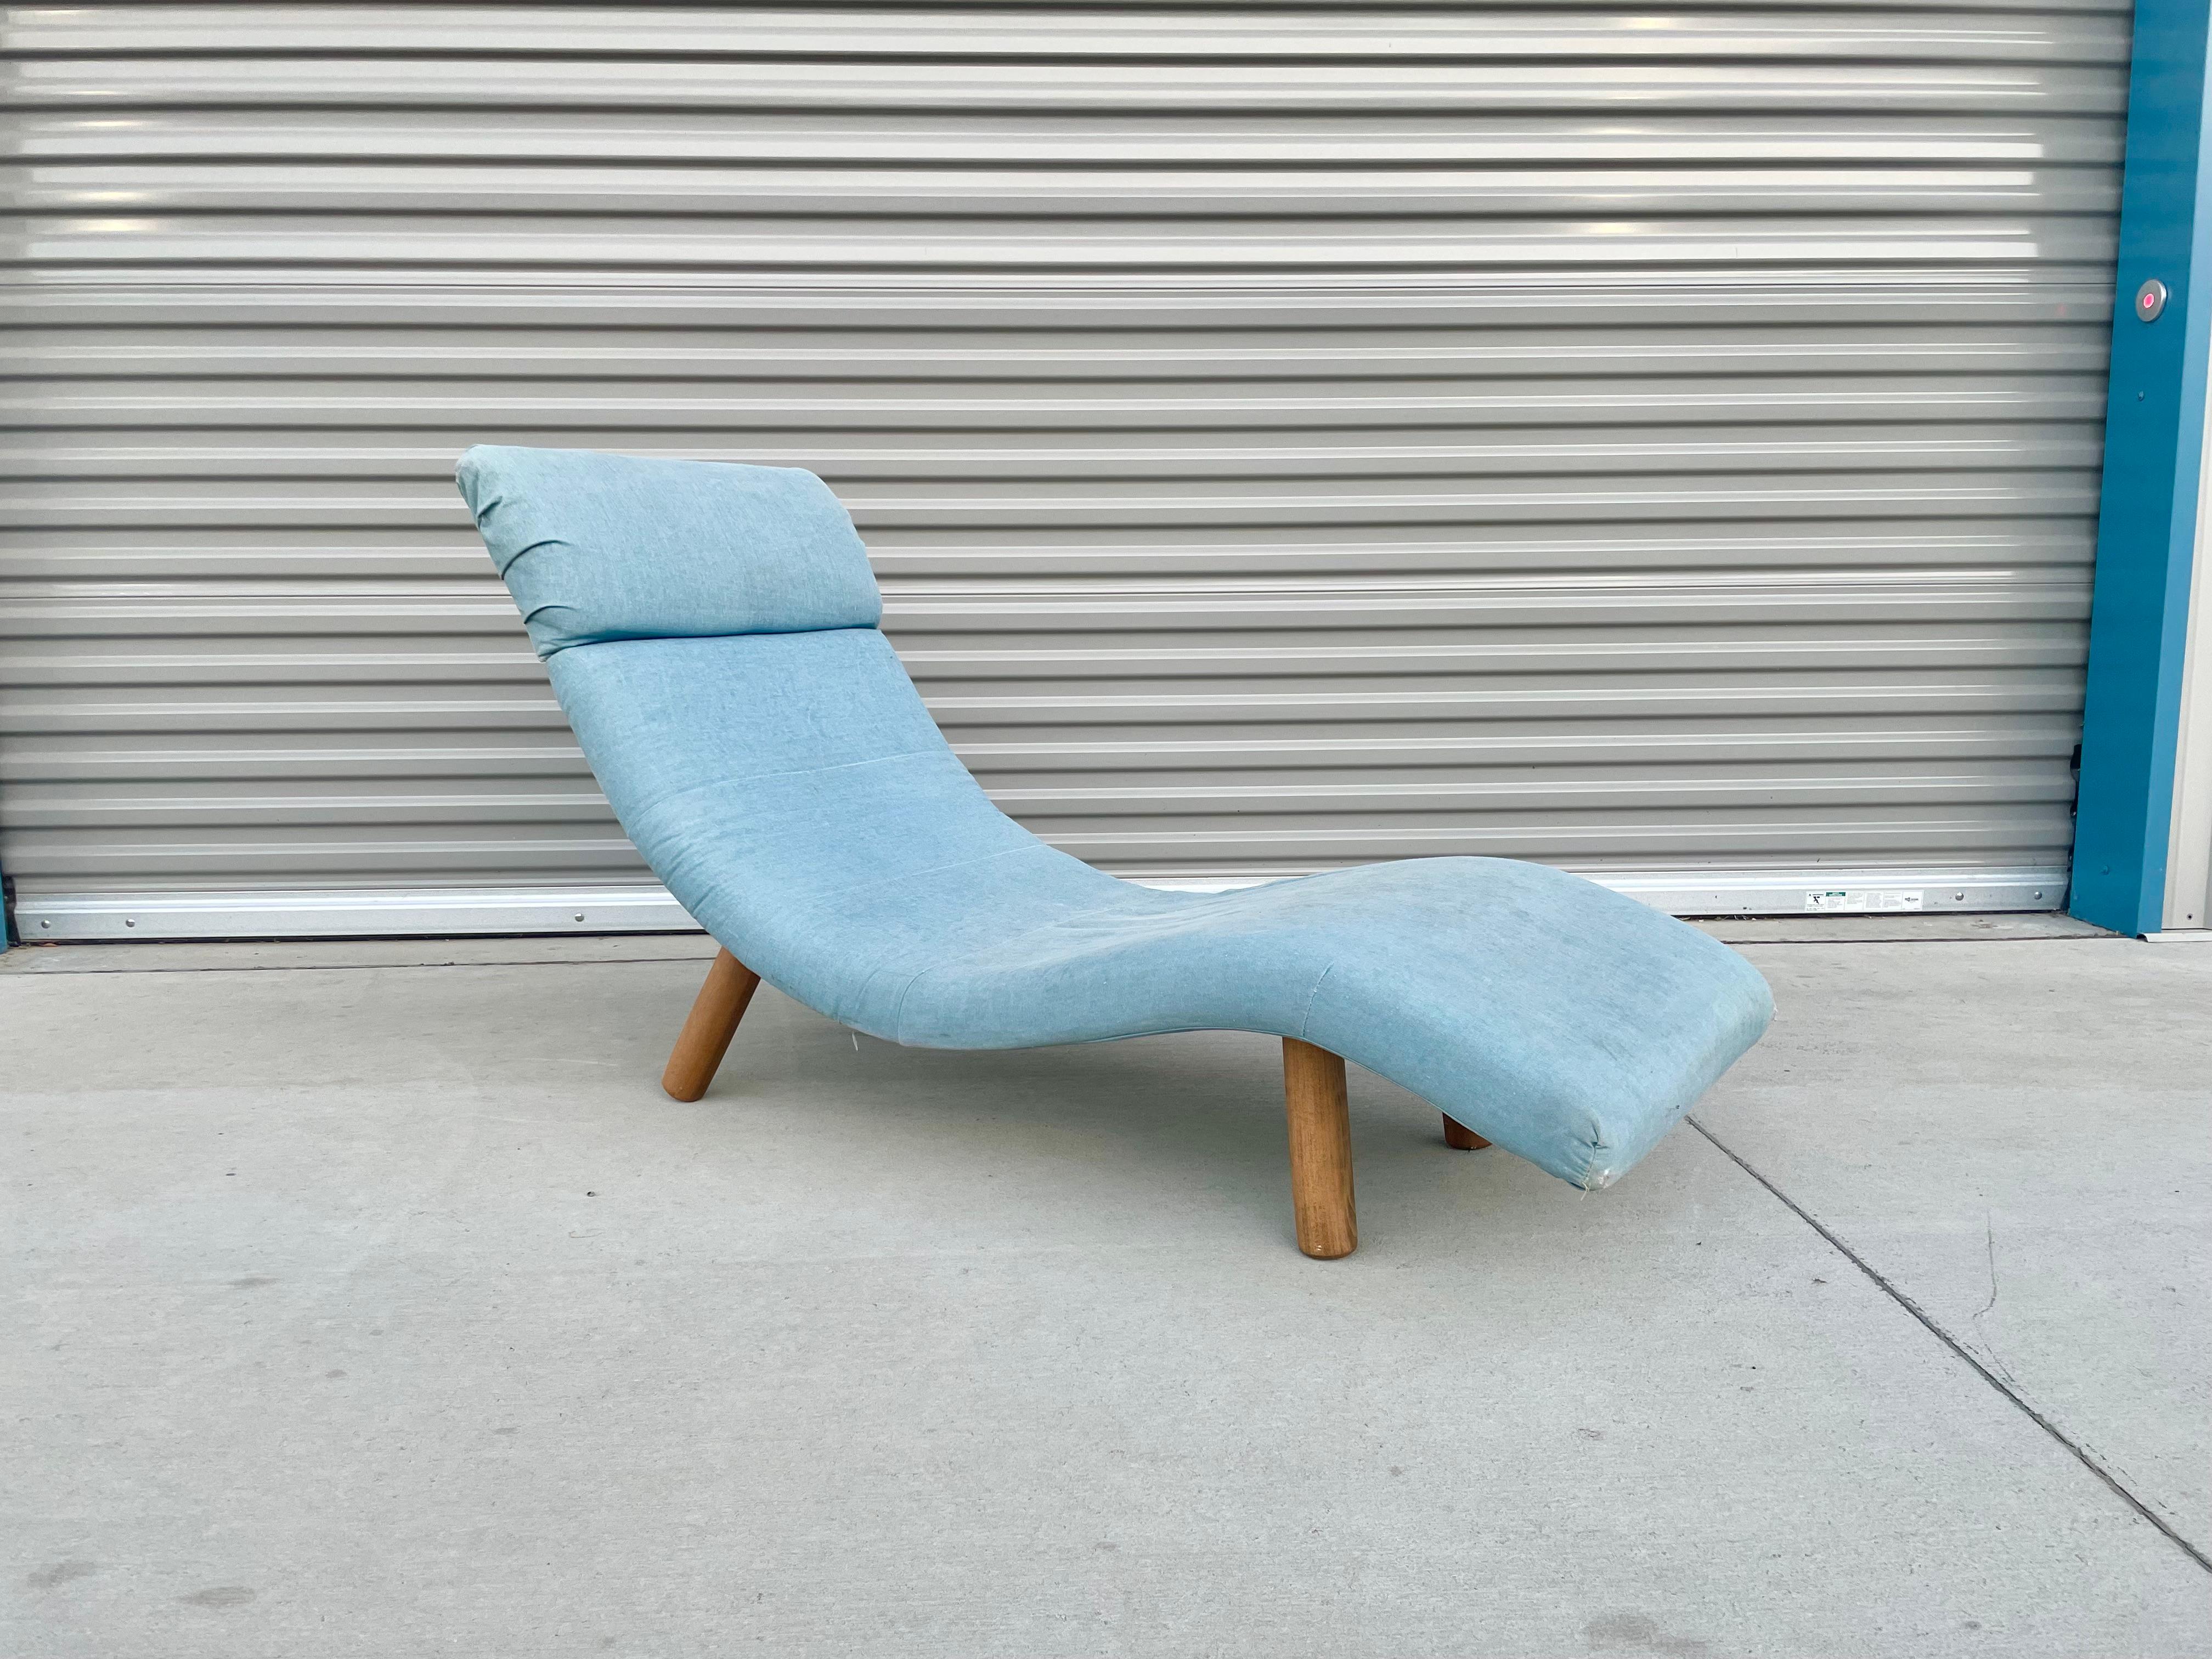 Midcentury wave chaise lounge designed and manufactured by Enrico Bartolini in the united states, circa 1970s. This beautiful vintage chaise lounge has an ocean wave design that proves comfort and one of a kind look to it. The chair also features